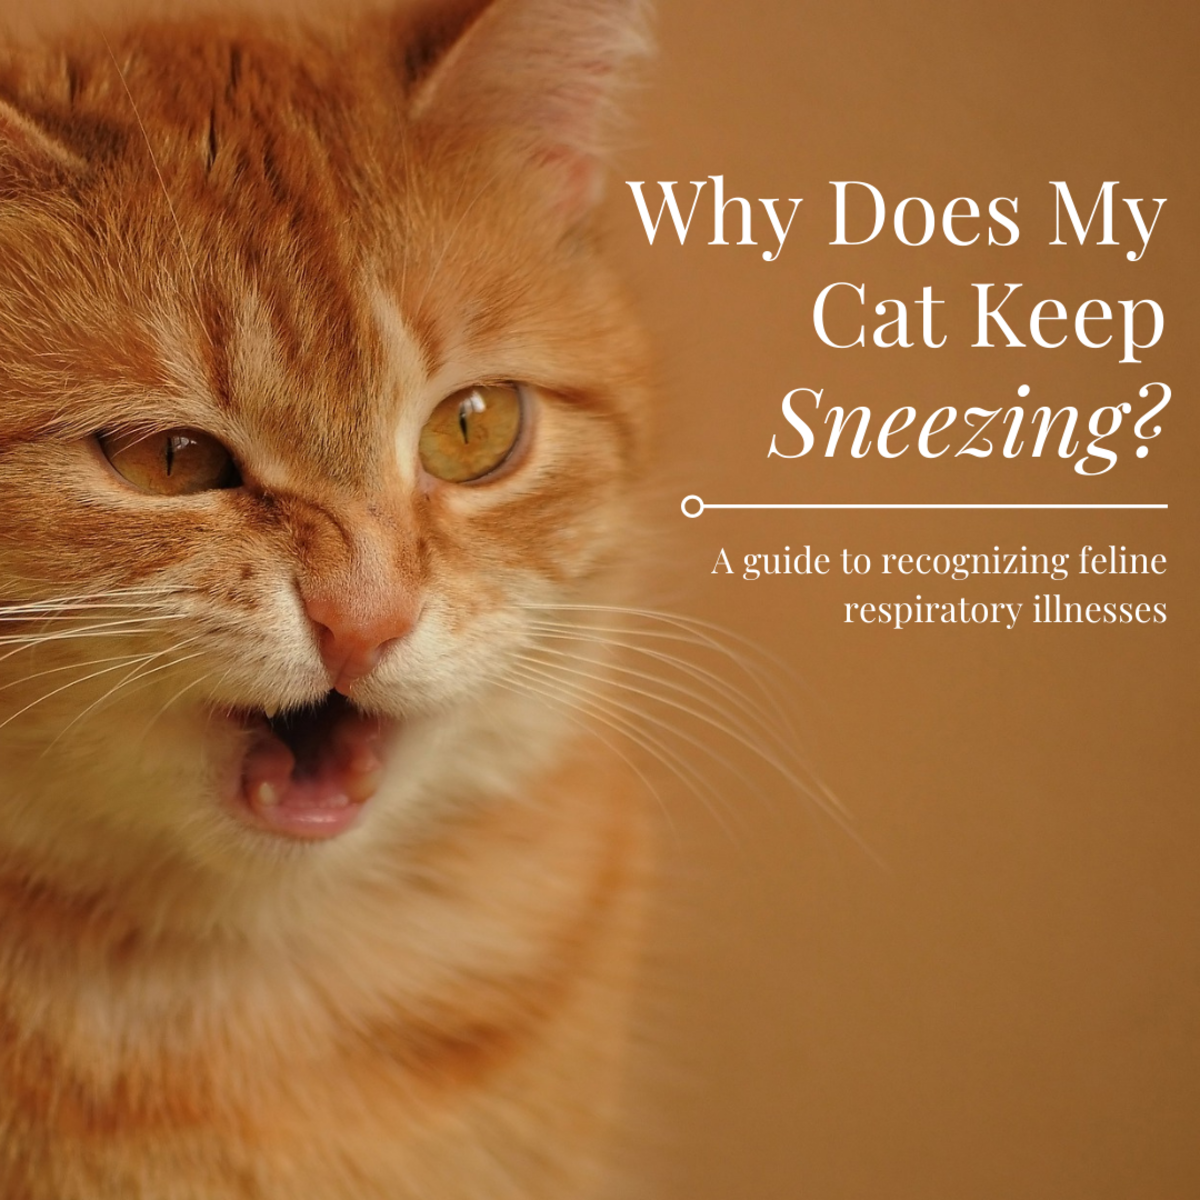 This guide will help you figure out why your cat might be sneezing so much and what you can do about it.